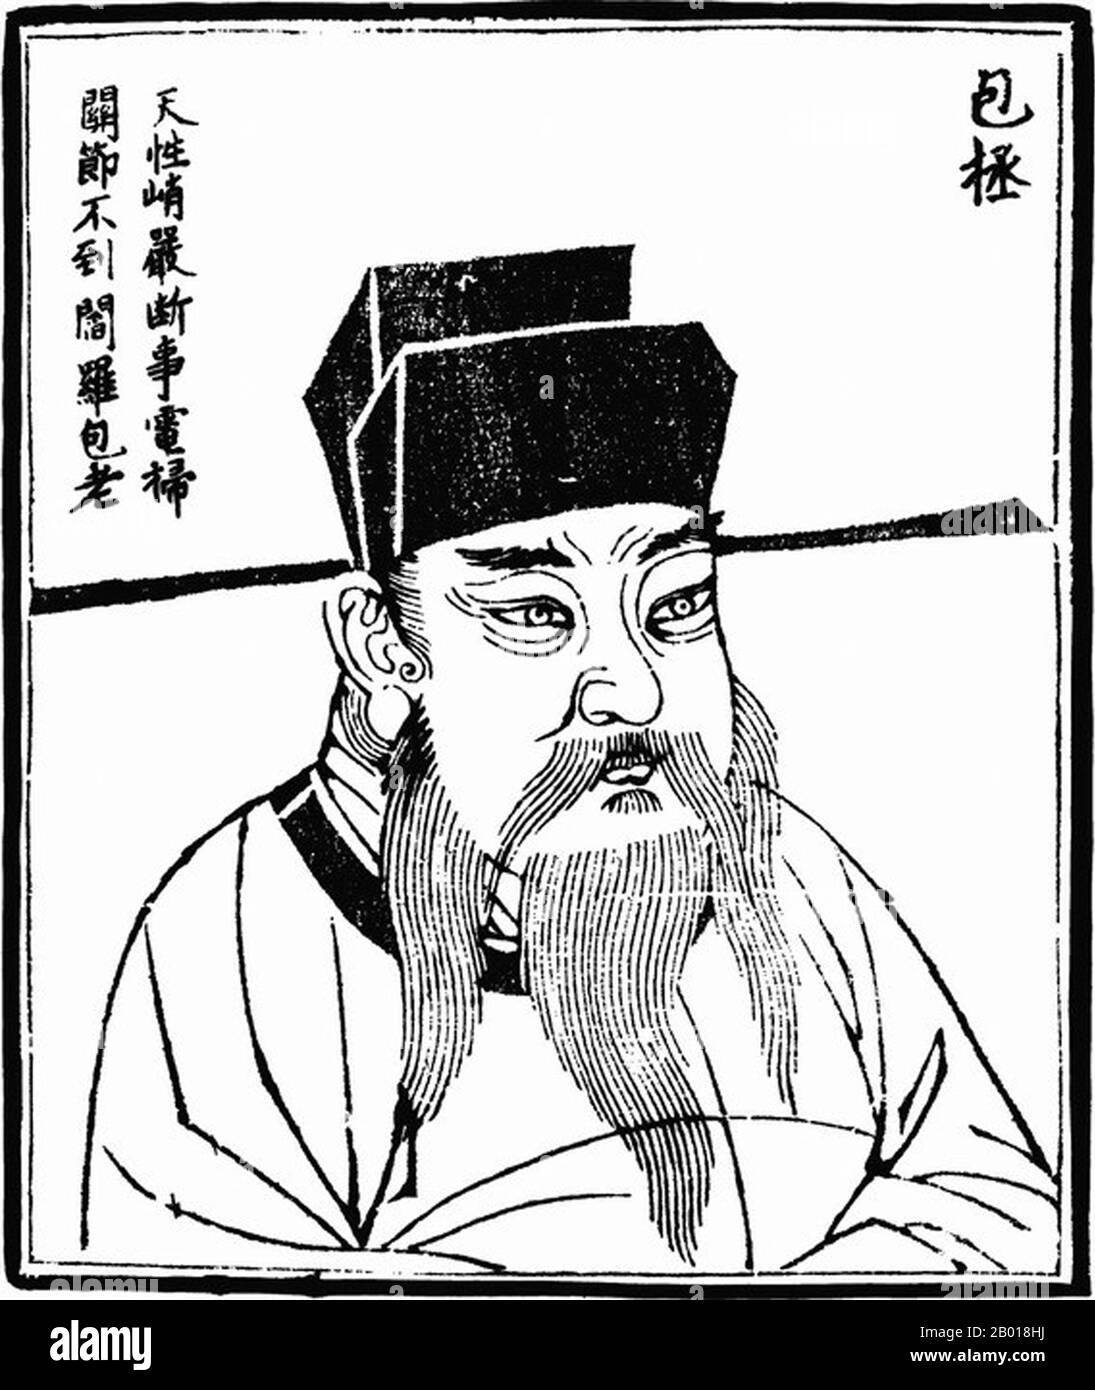 China: Bao Zheng (5 March 999 - 3 July 1062), politician and court official to Emperor Renzong of the Northern Song Dynasty (1127-1279). Woodblock print from 'Images of Ancient People in History', c. 1498.  Bao Zheng is today respected as a symbol of justice in China. Throughout history, his largely fictionalised stories have appeared in a variety of different literary and dramatic genres, and have enjoyed sustained popularity. Born to a scholar family in Hefei, he was famous for his uncompromising stance against corruption among government officials. Stock Photo